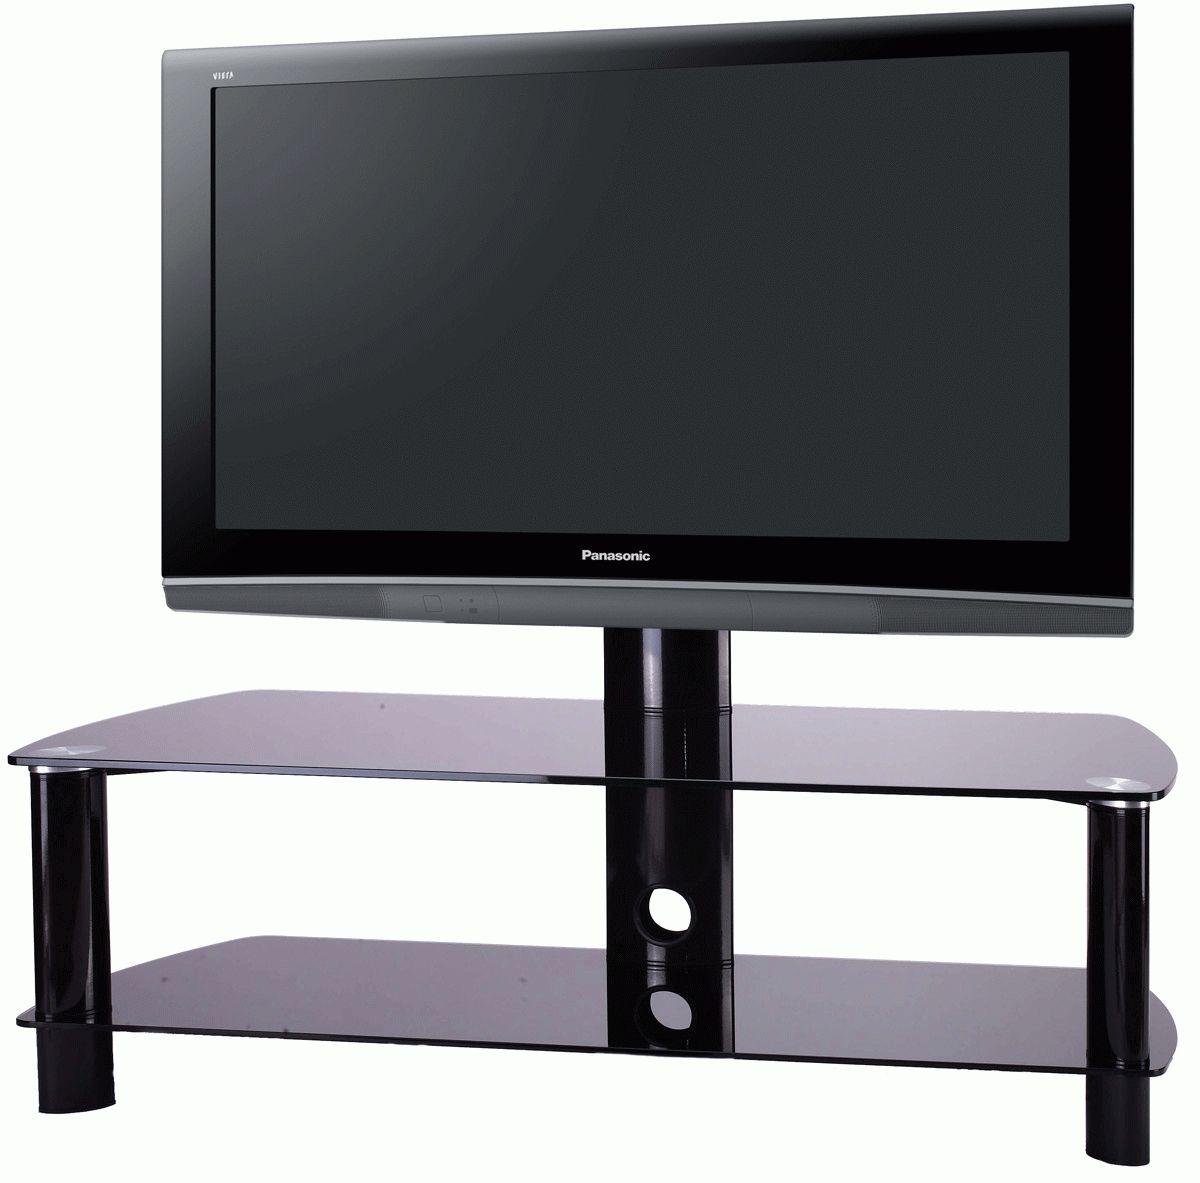 Stil Stand Stuk 2055chbb 2055 60 Inch Cantilever Tv Throughout Stil Tv Stands (View 9 of 15)